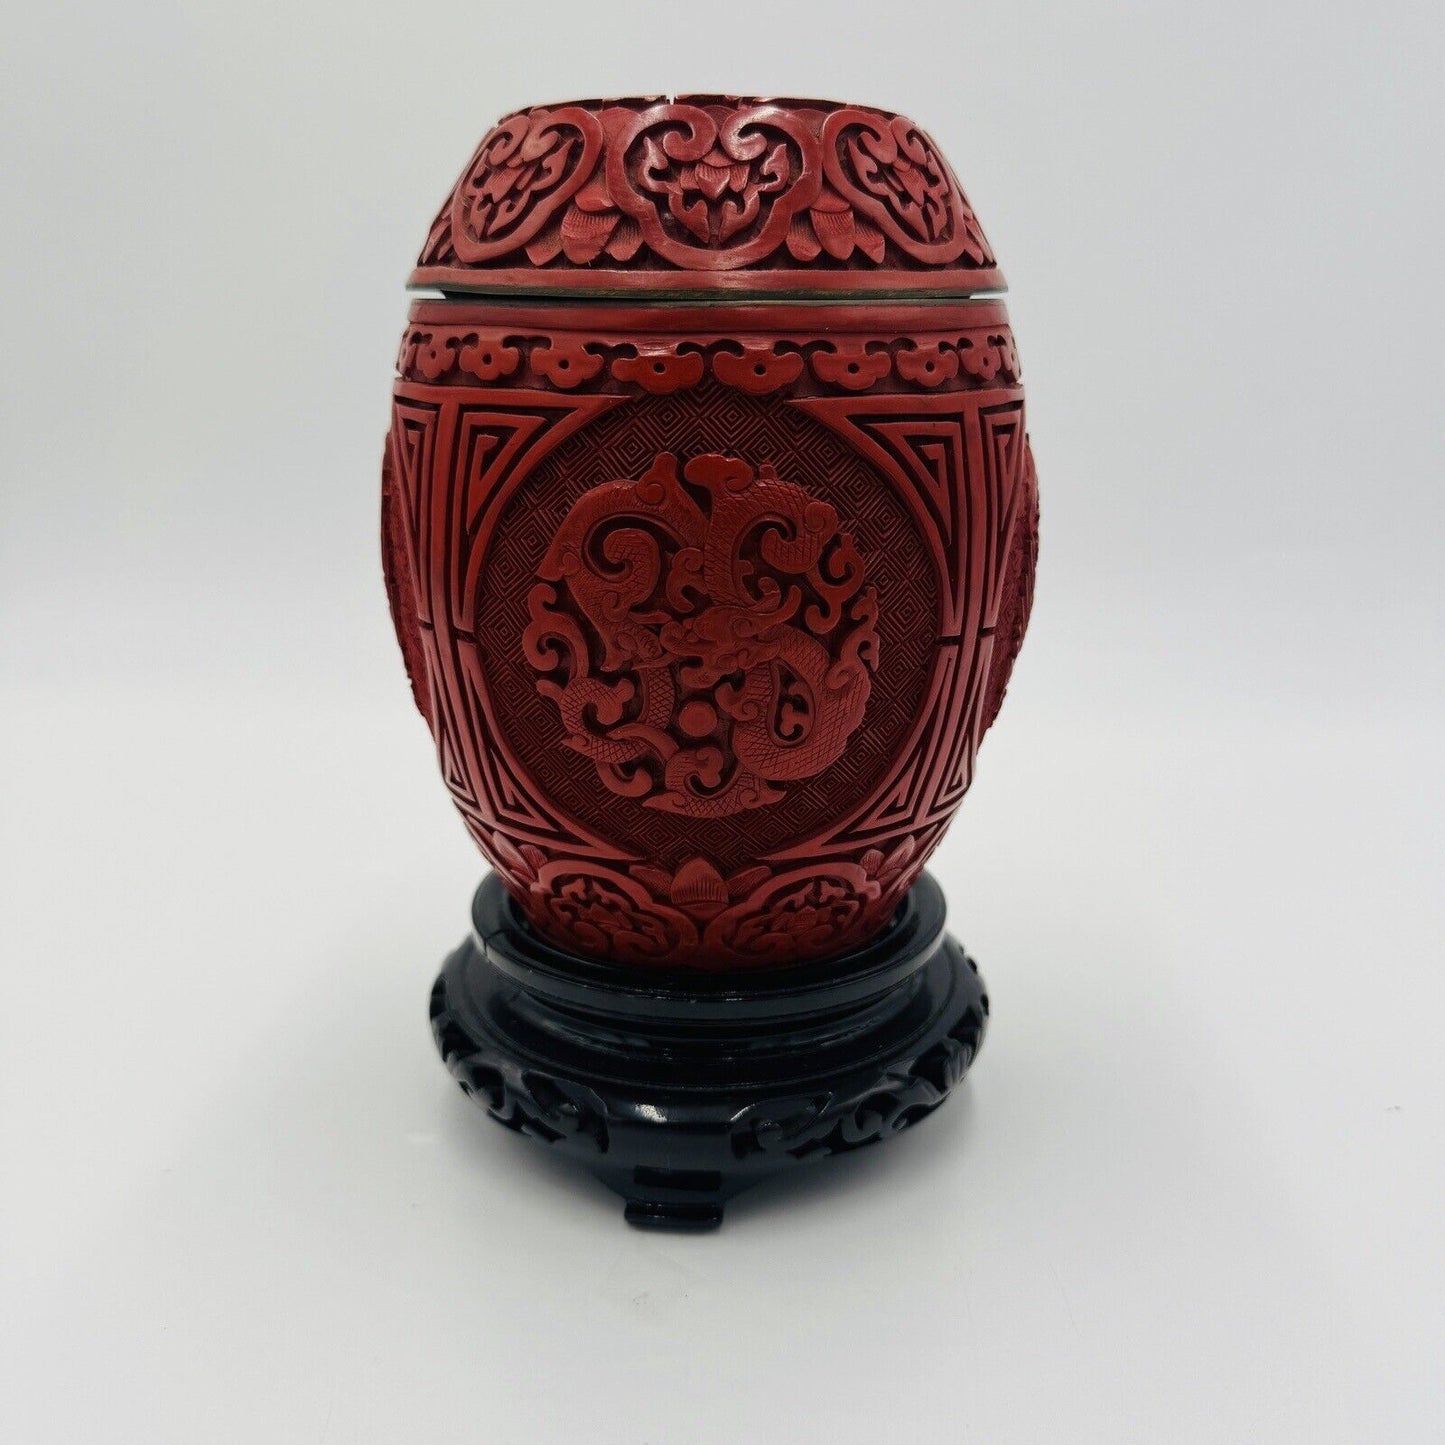 Chinese Cinnabar Red Lacquer & Brass Carved Lidded Urn Vase Enameled Blue 6.5"